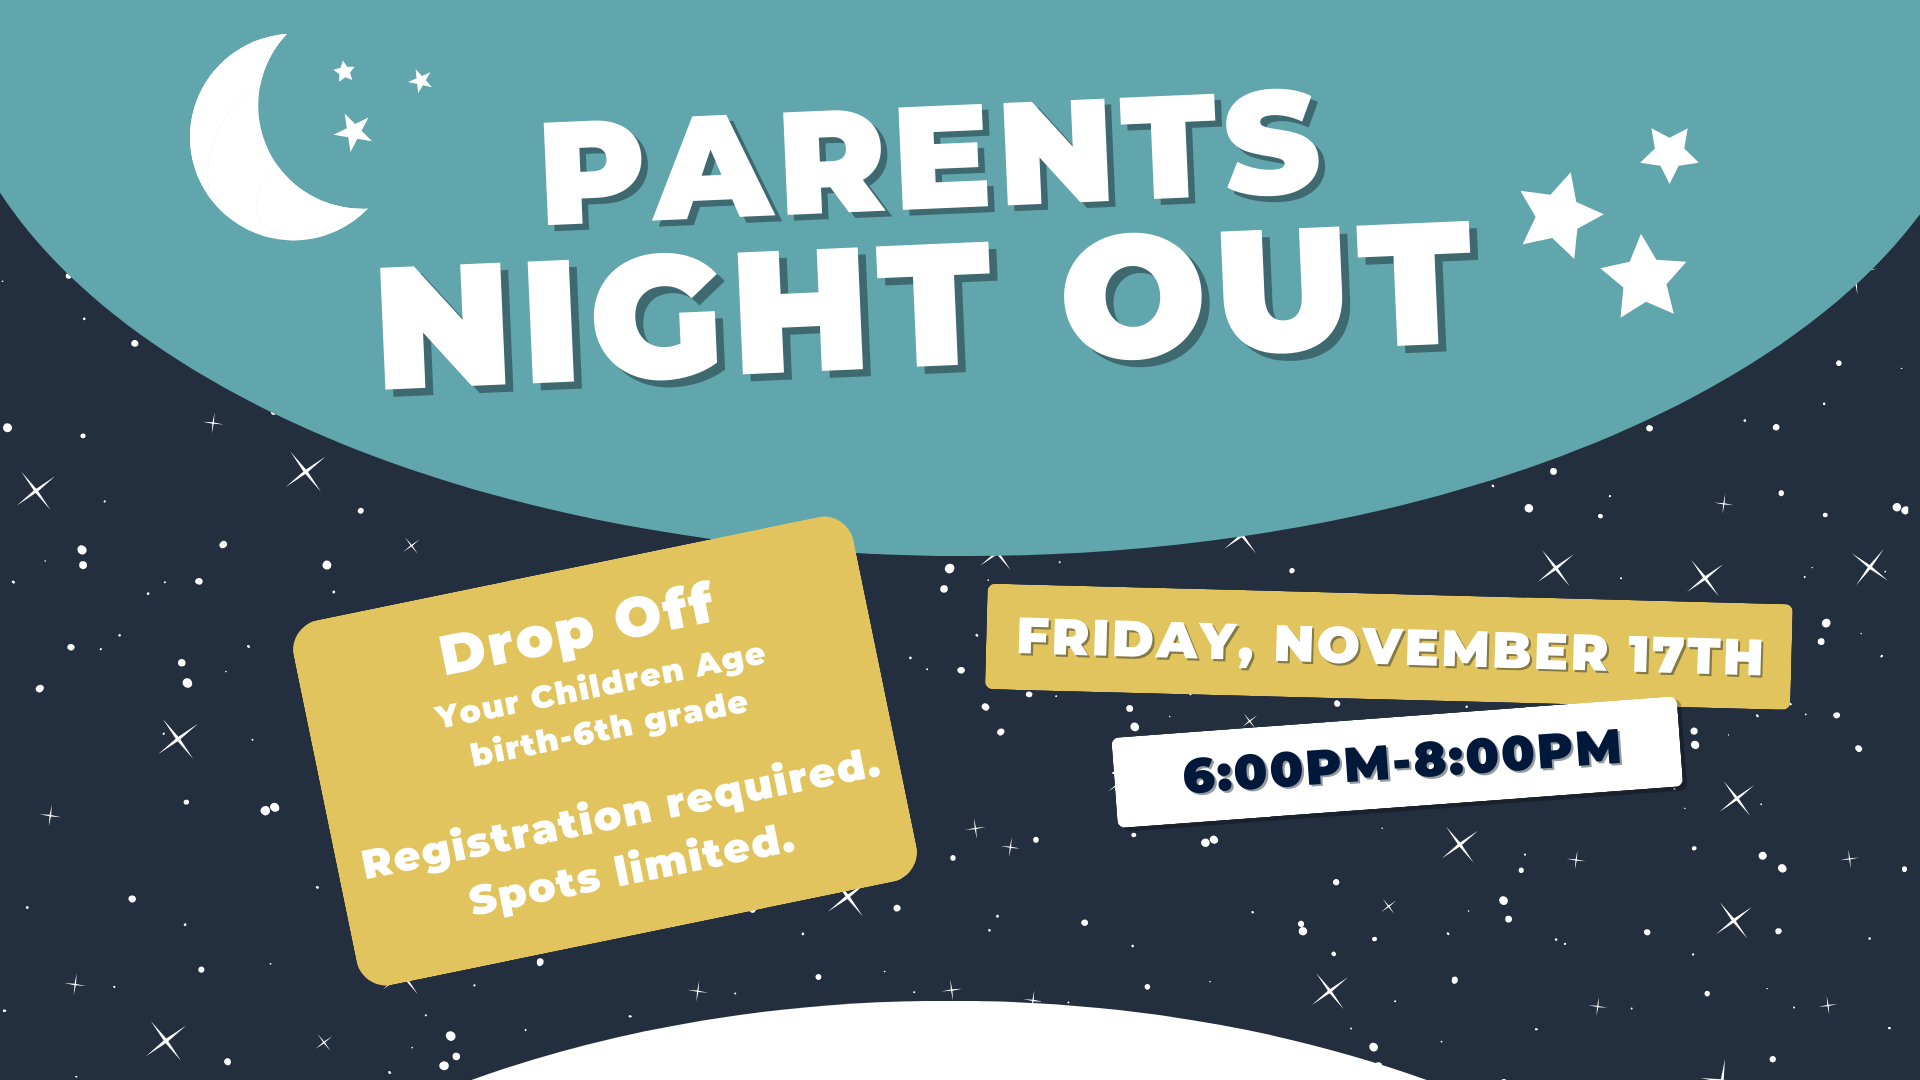 Parents Night Out - Lake Hills Church